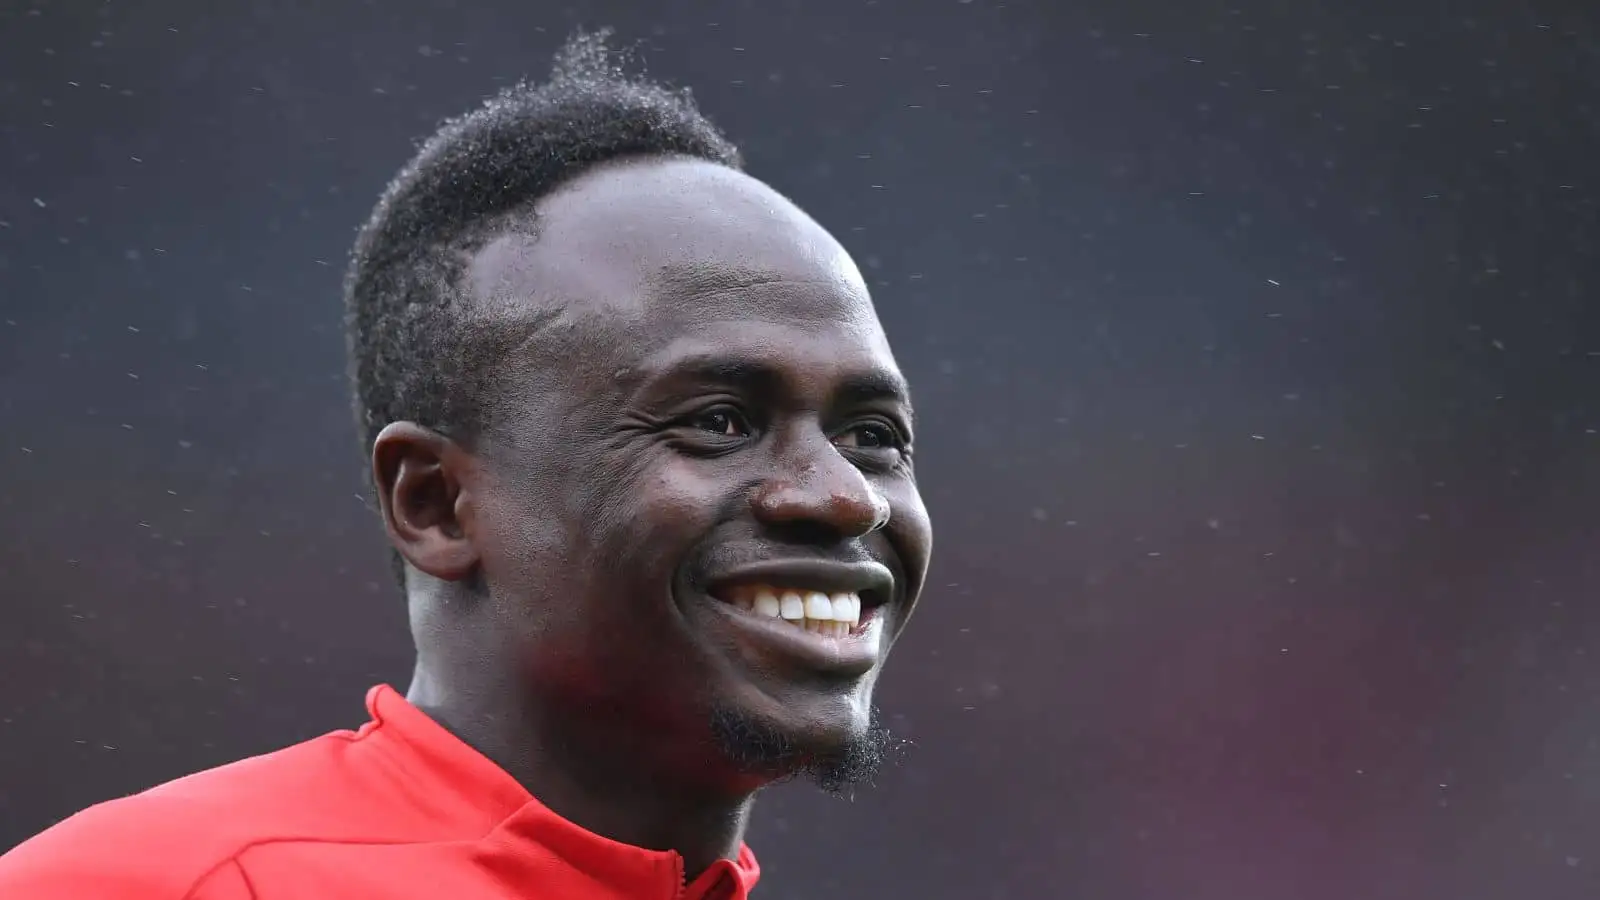 Sadio Mane, Liverpool forward, warms up for Premier League game at Bournemouth